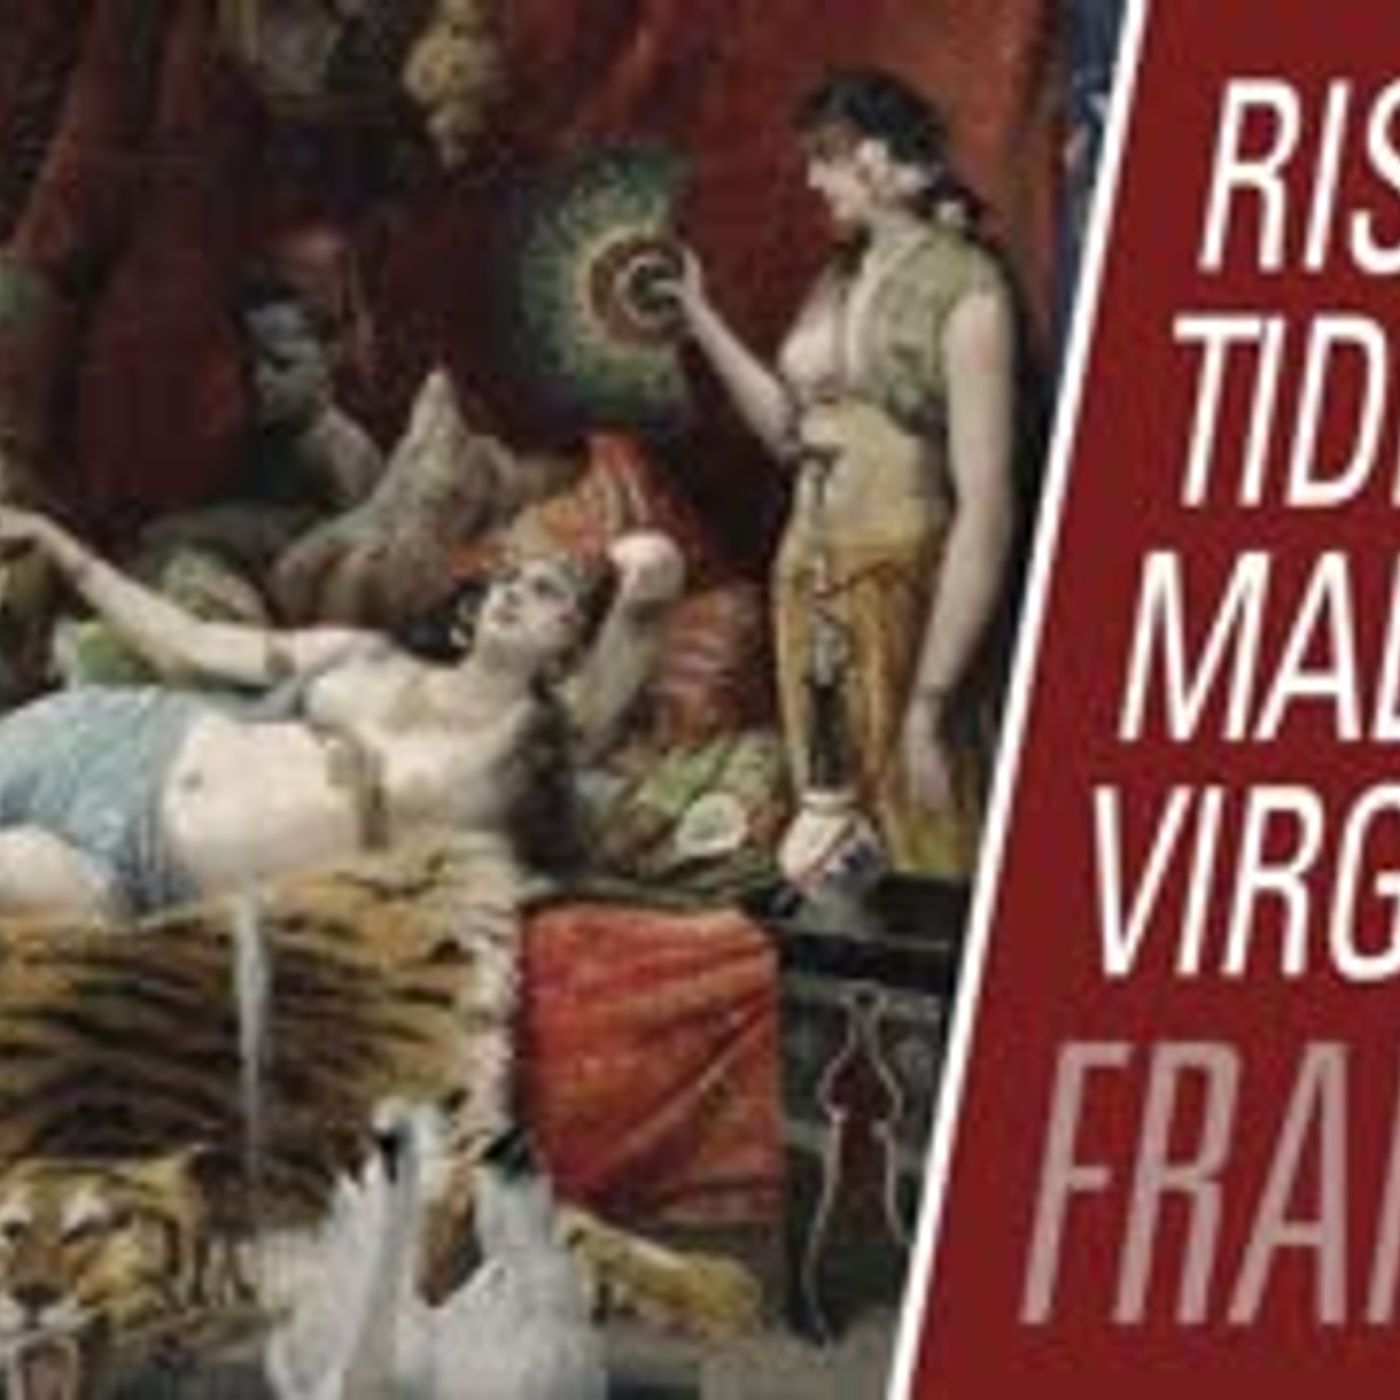 How do we stop the rising tide of male virginity? | Maintaining Frame 95